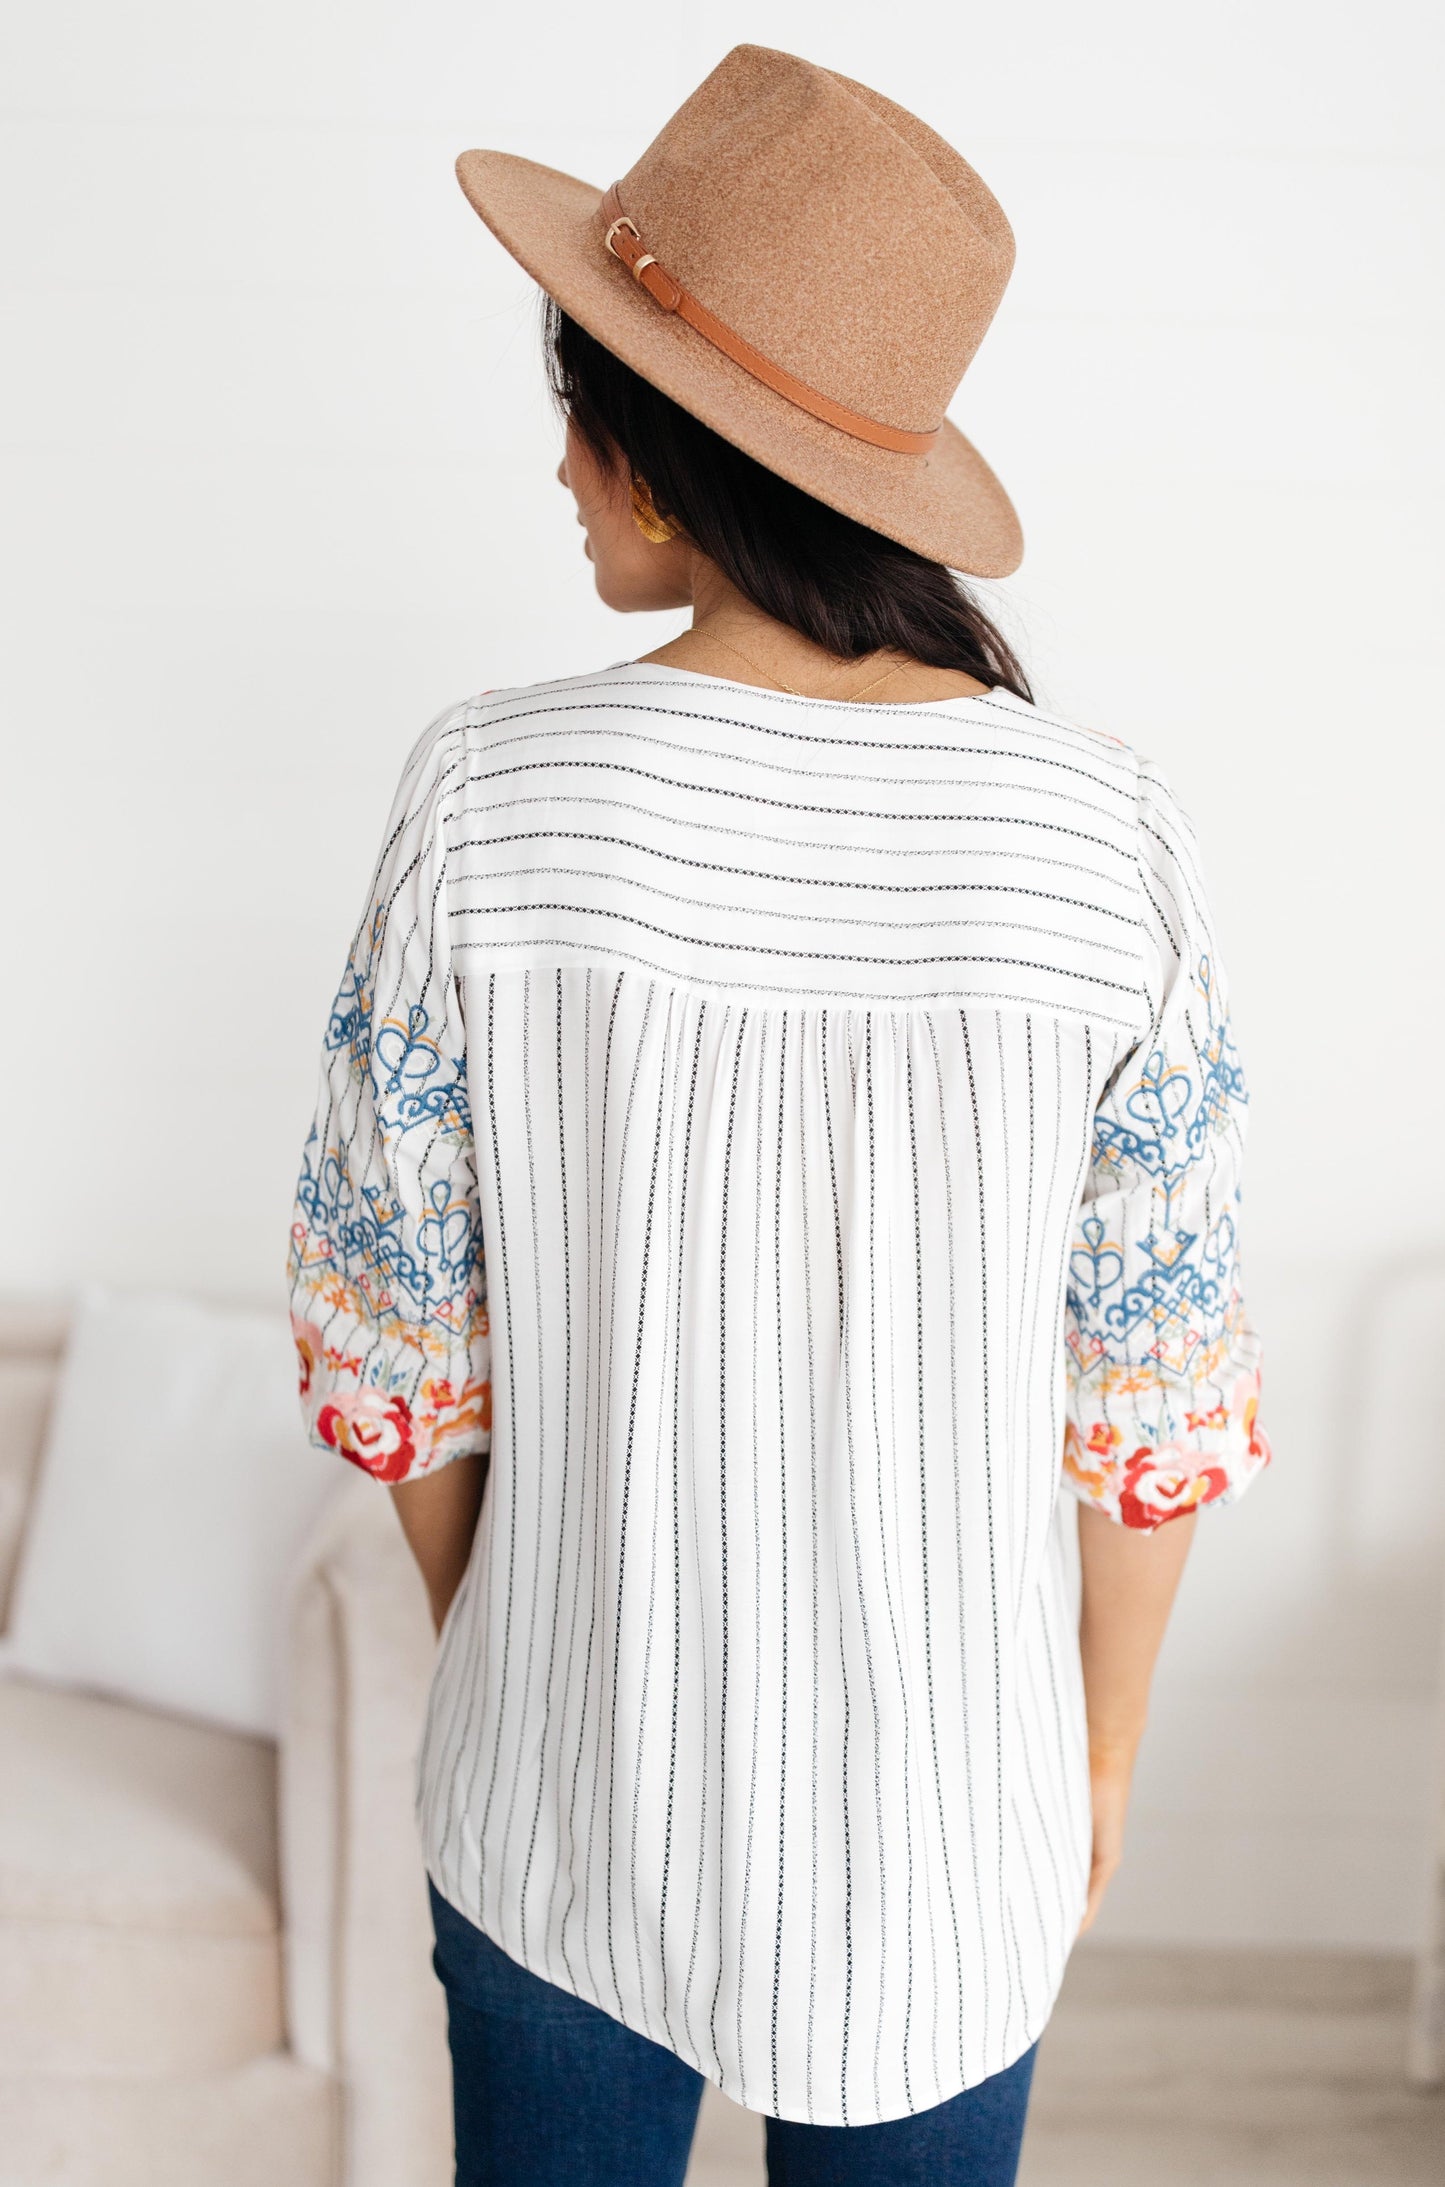 Exquisite Embroidery Blouse